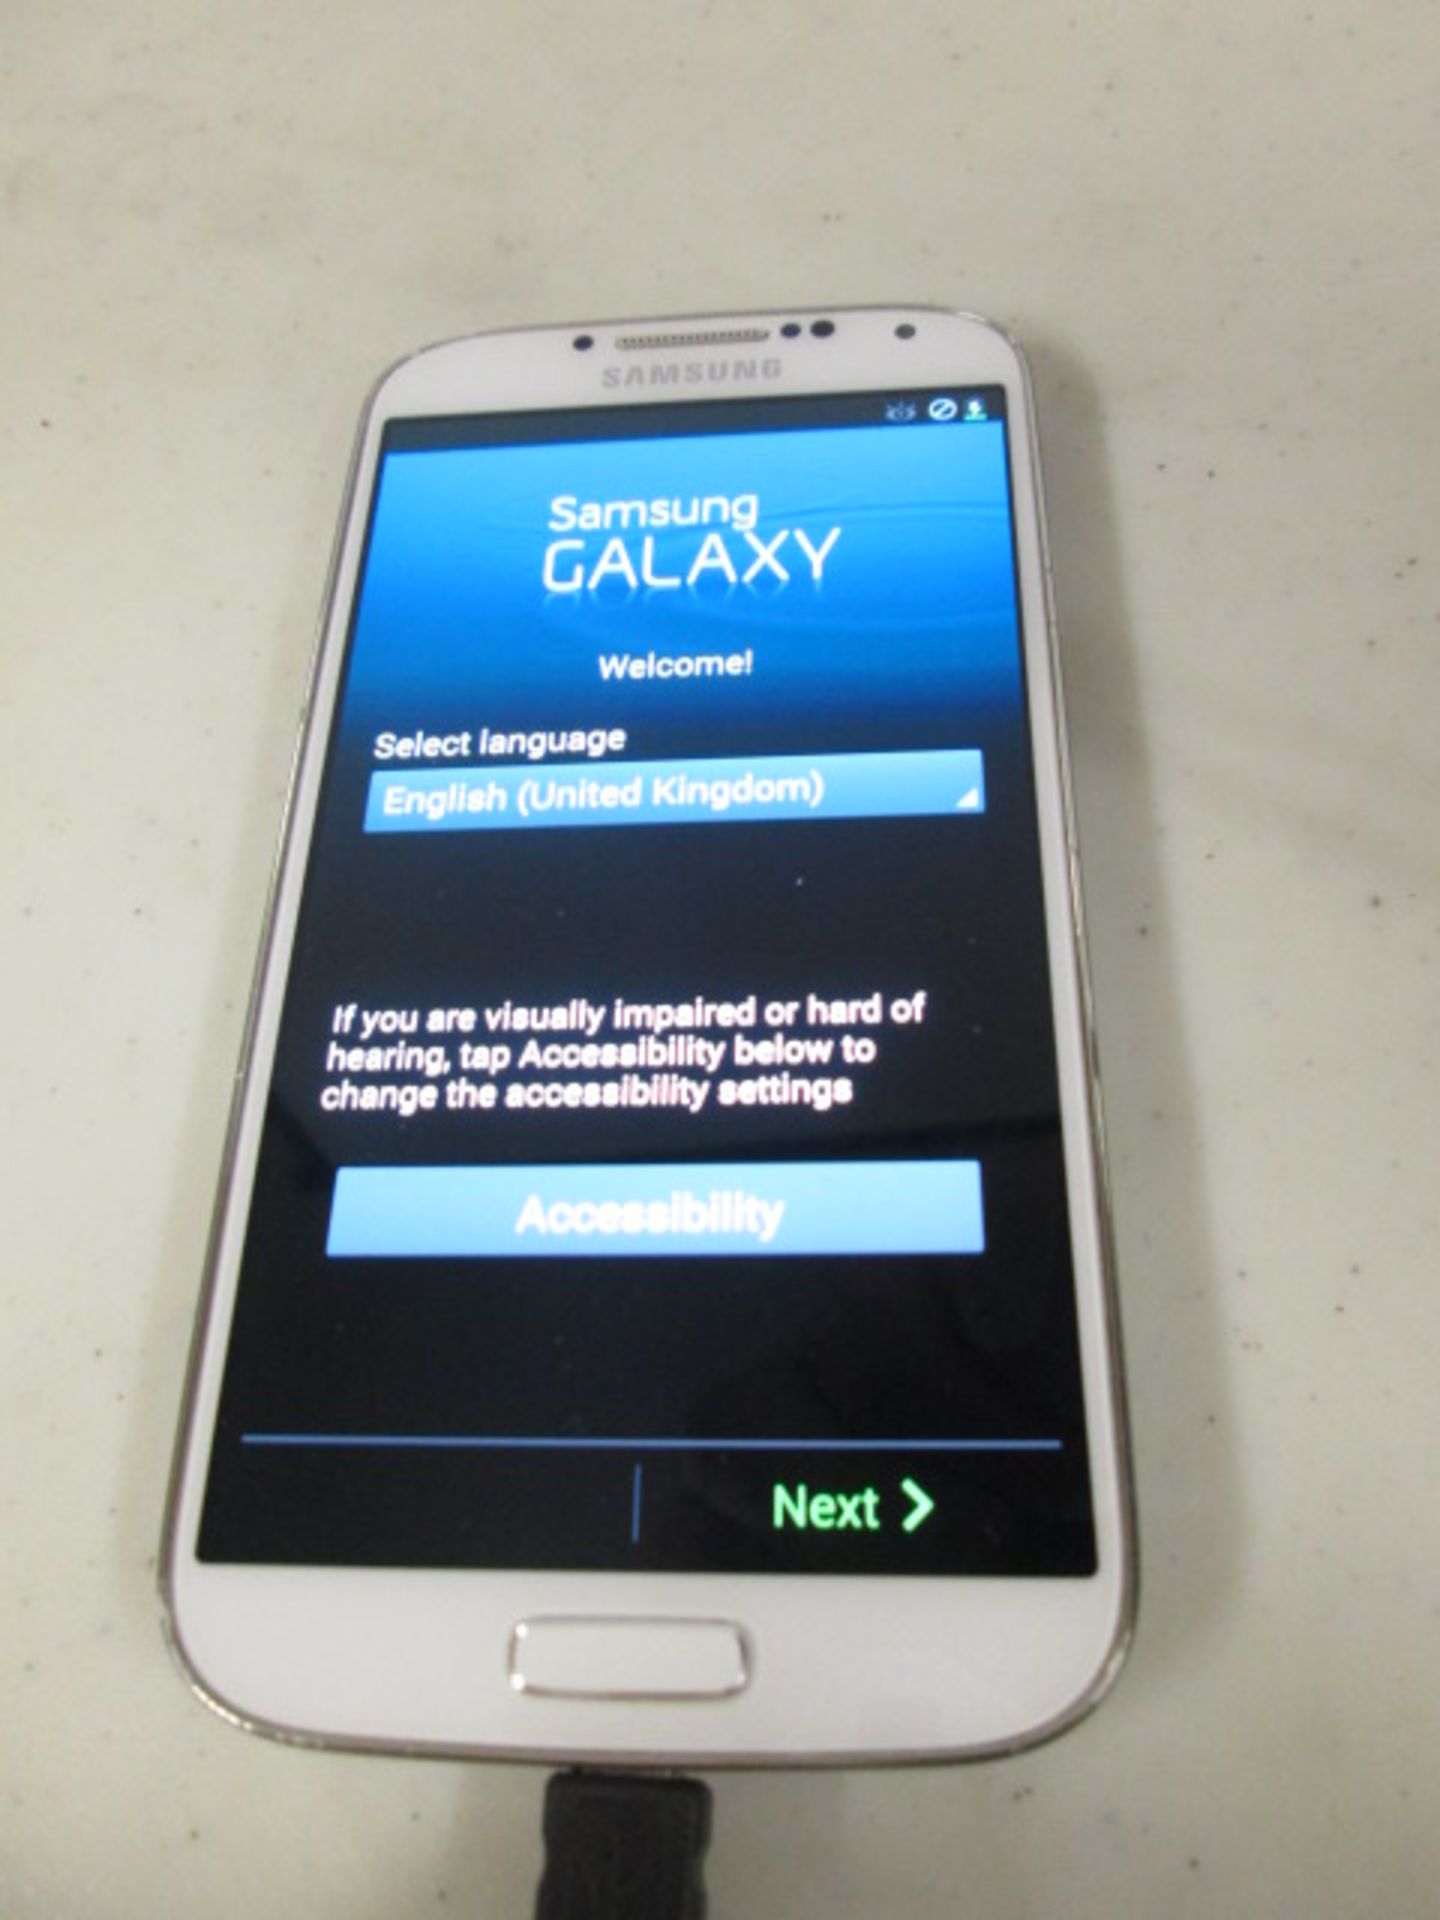 Samsung Galaxy S4 Mobile Phone, Model GT-19505, 16GB. Colour White. Comes with Charger. Locked to - Image 5 of 6